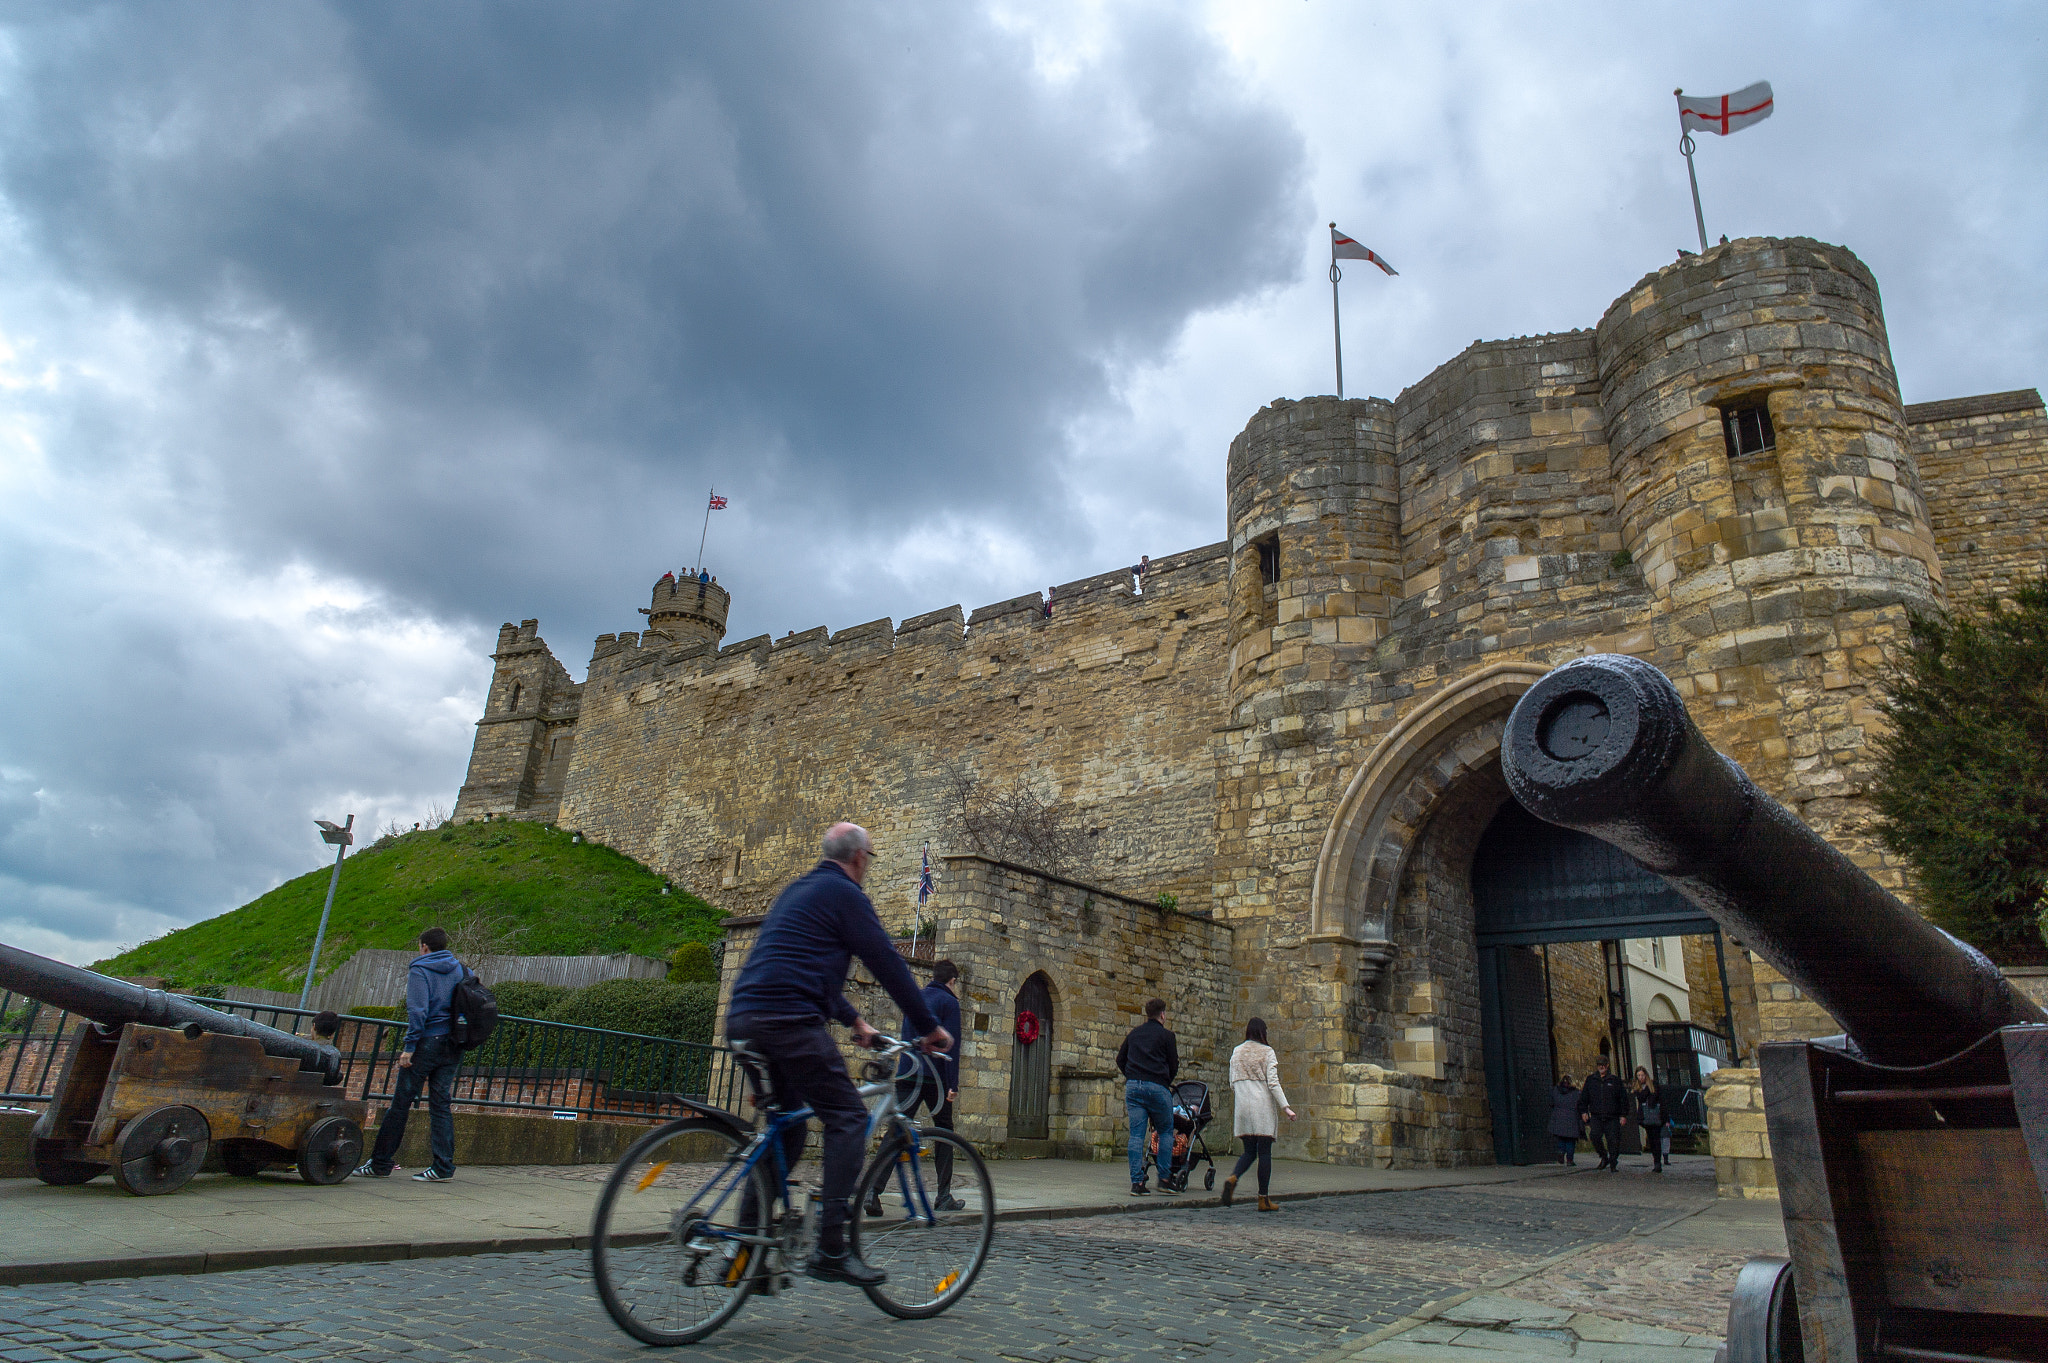 Elmarit-M 21mm f/2.8 sample photo. Lincoln castle, cannons, bicycle, gate, magna carta, lincolnshire,uk  .
jaimanuel freire photography